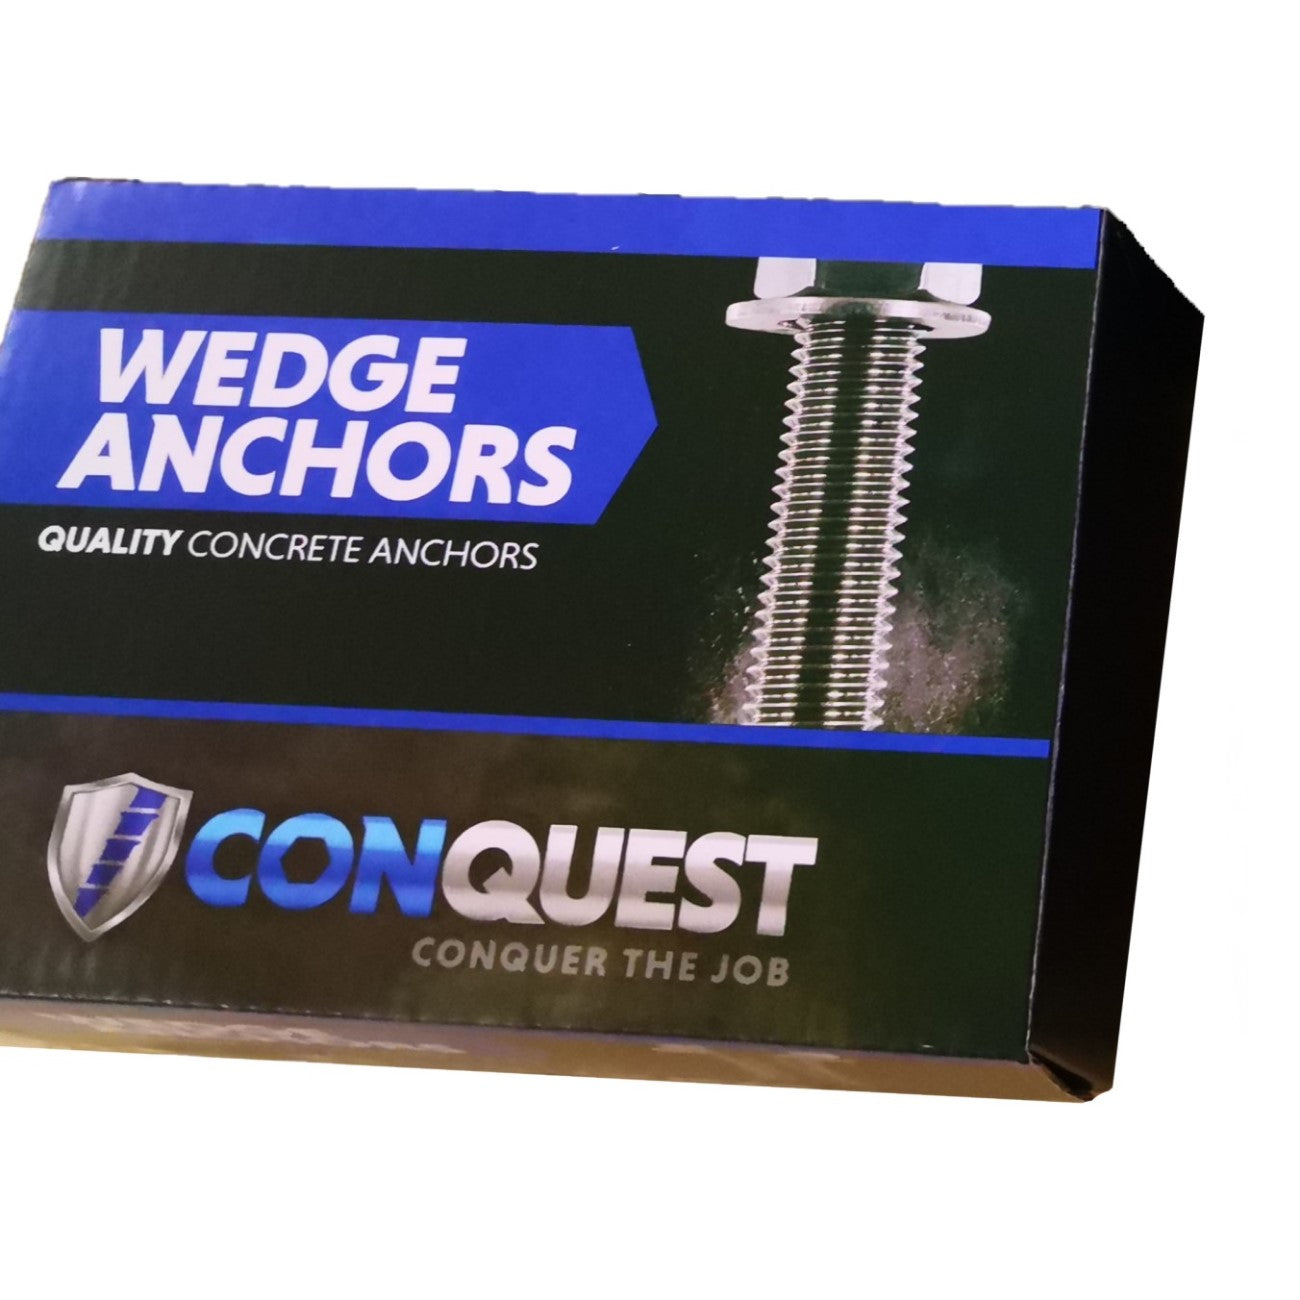 3/4" x 7" Conquest Wedge Anchors - 304 Stainless Steel, Pkg 10